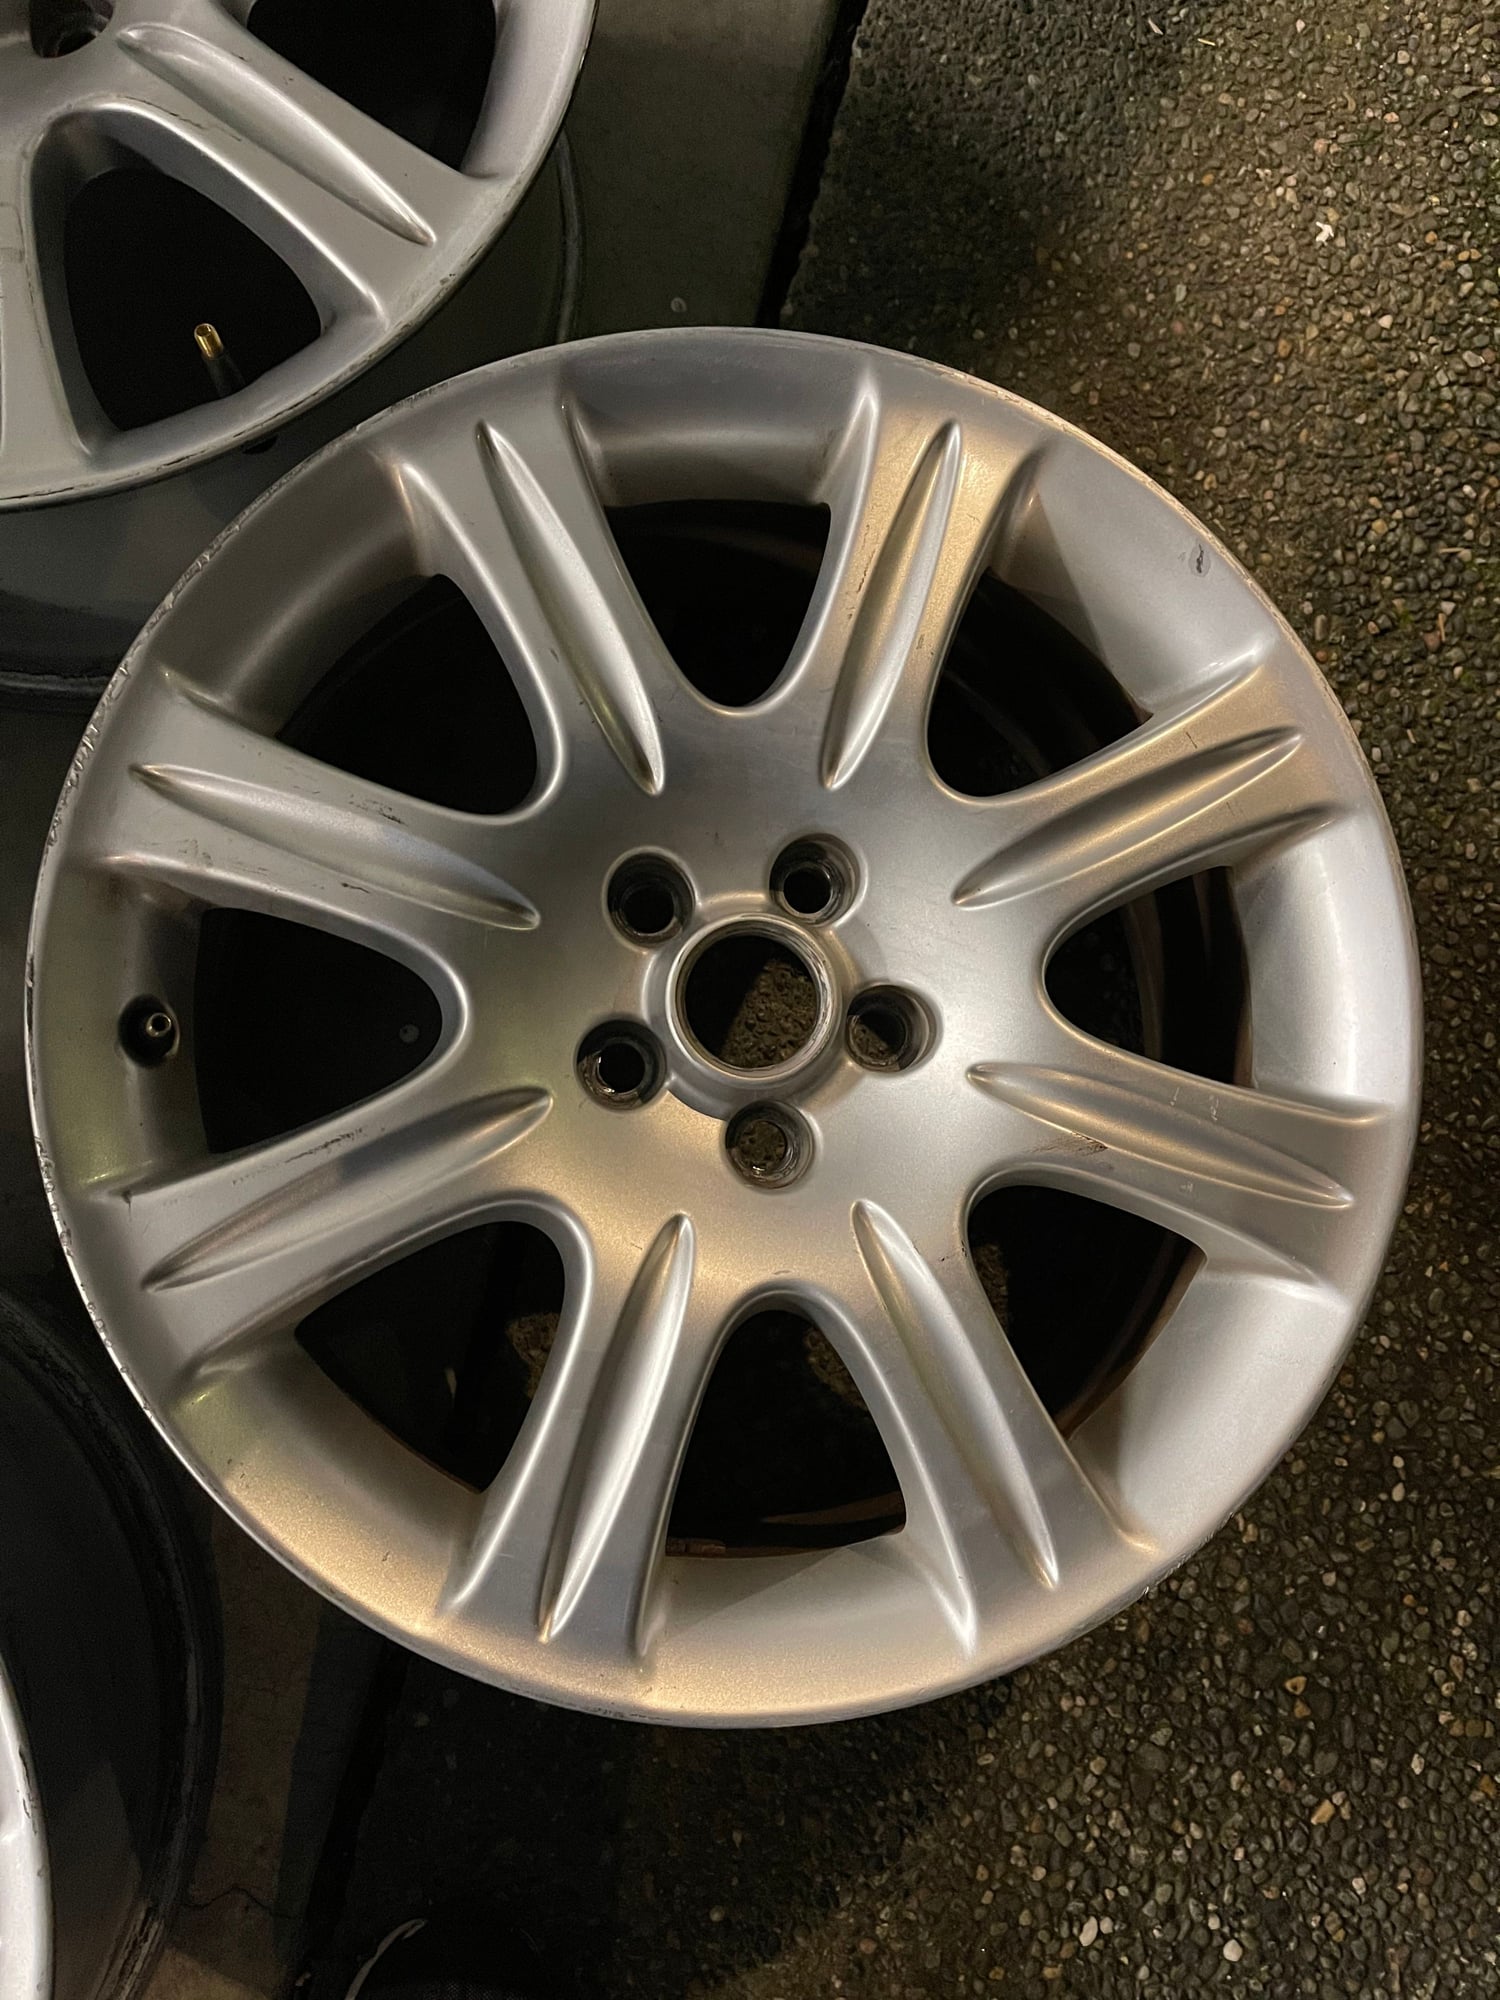 Wheels and Tires/Axles - XJ8 Dynamic 18x8 rims - set of 4.  8 on a scale if 10 - Used - 2004 to 2009 Jaguar XJ8 - Seattle, WA 98101, United States